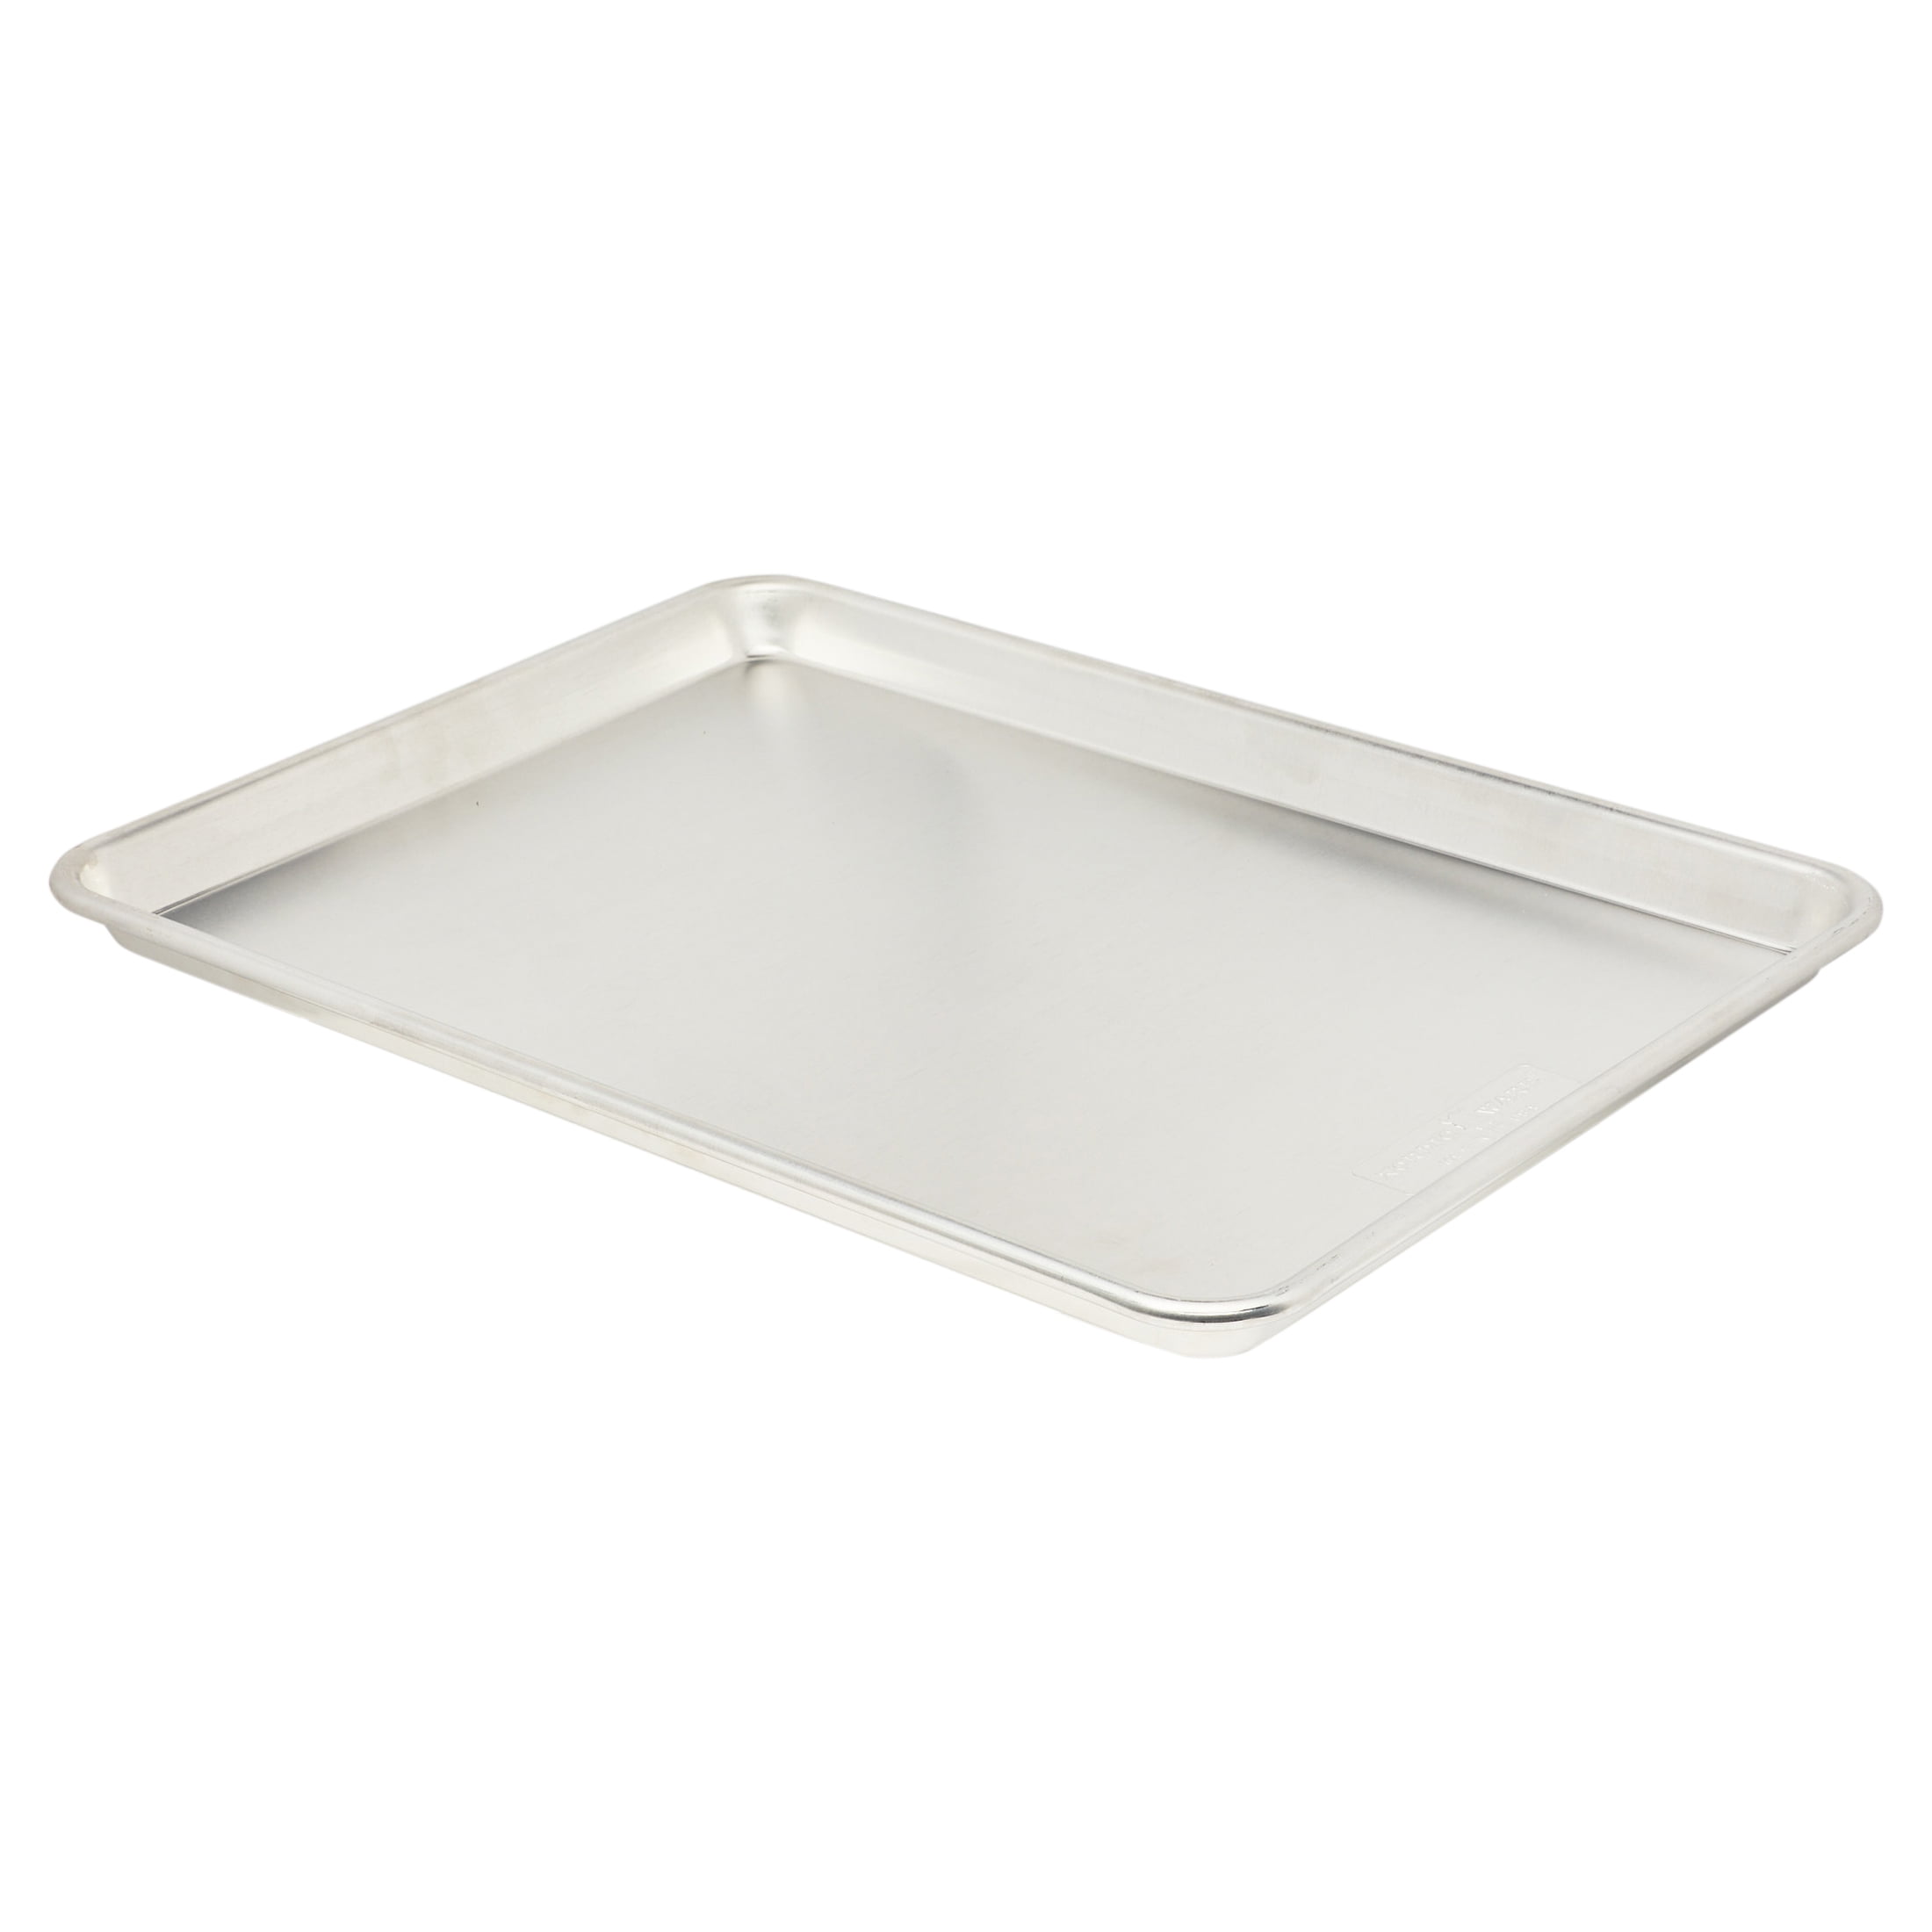 Nordic Ware Aluminum High Sided Half Sheet Pan With Lid 13” x 18”